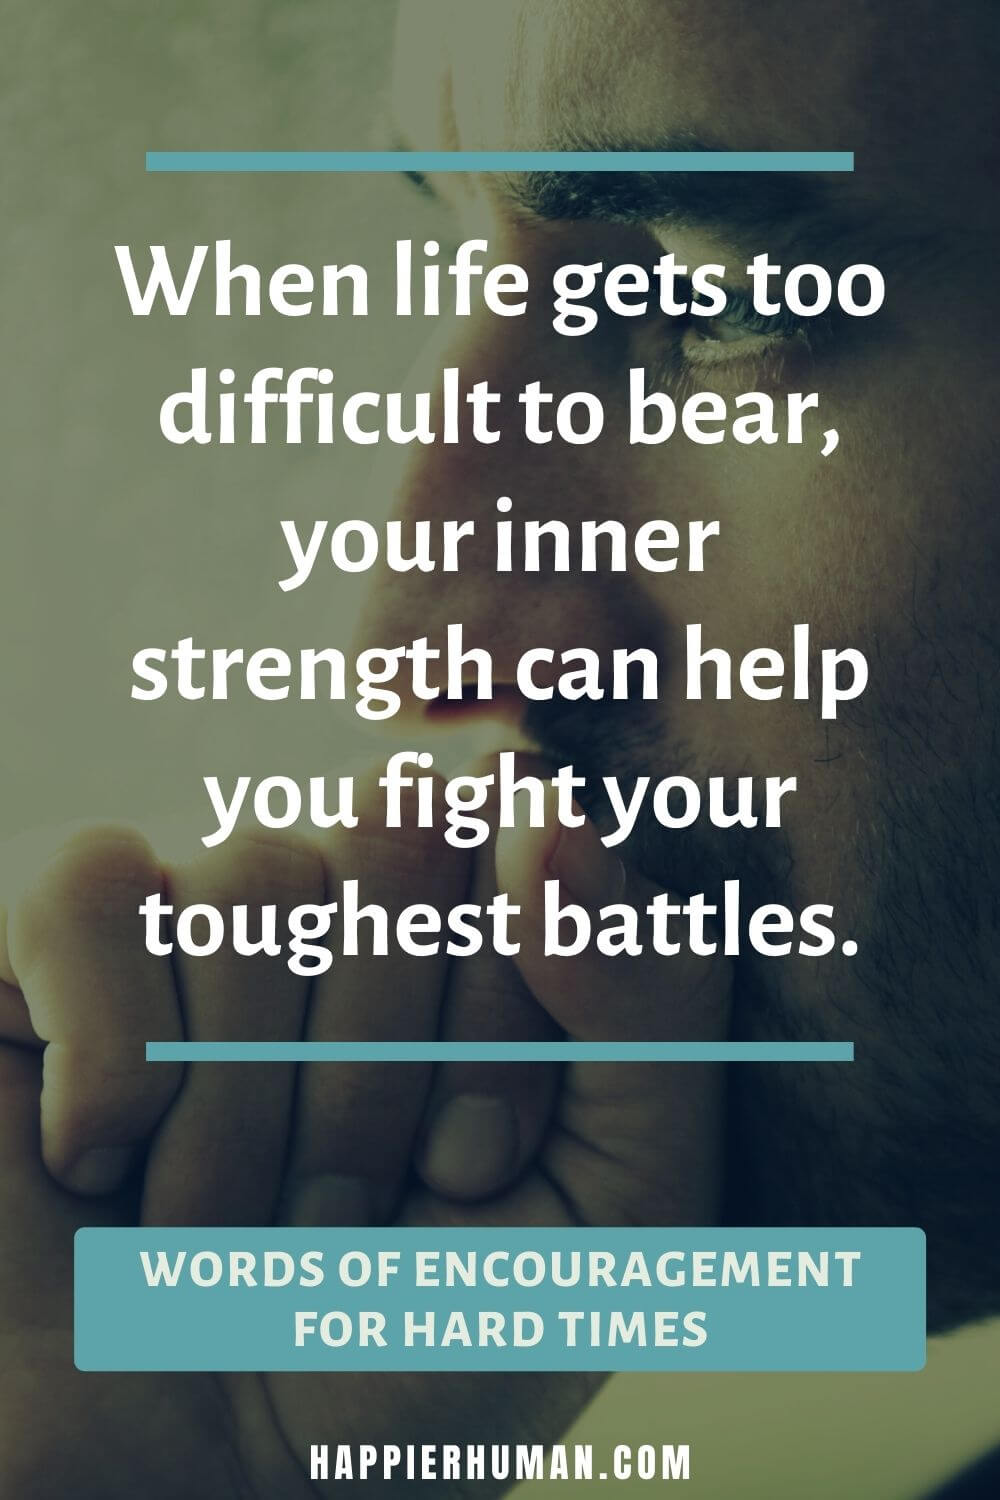 Words of Encouragement for Hard Times - When life gets too difficult to bear, your inner strength can help you fight your toughest battles. | words of encouragement for hard times bible verse | words of encouragement for him during hard times | what to text someone going through a hard time quotes